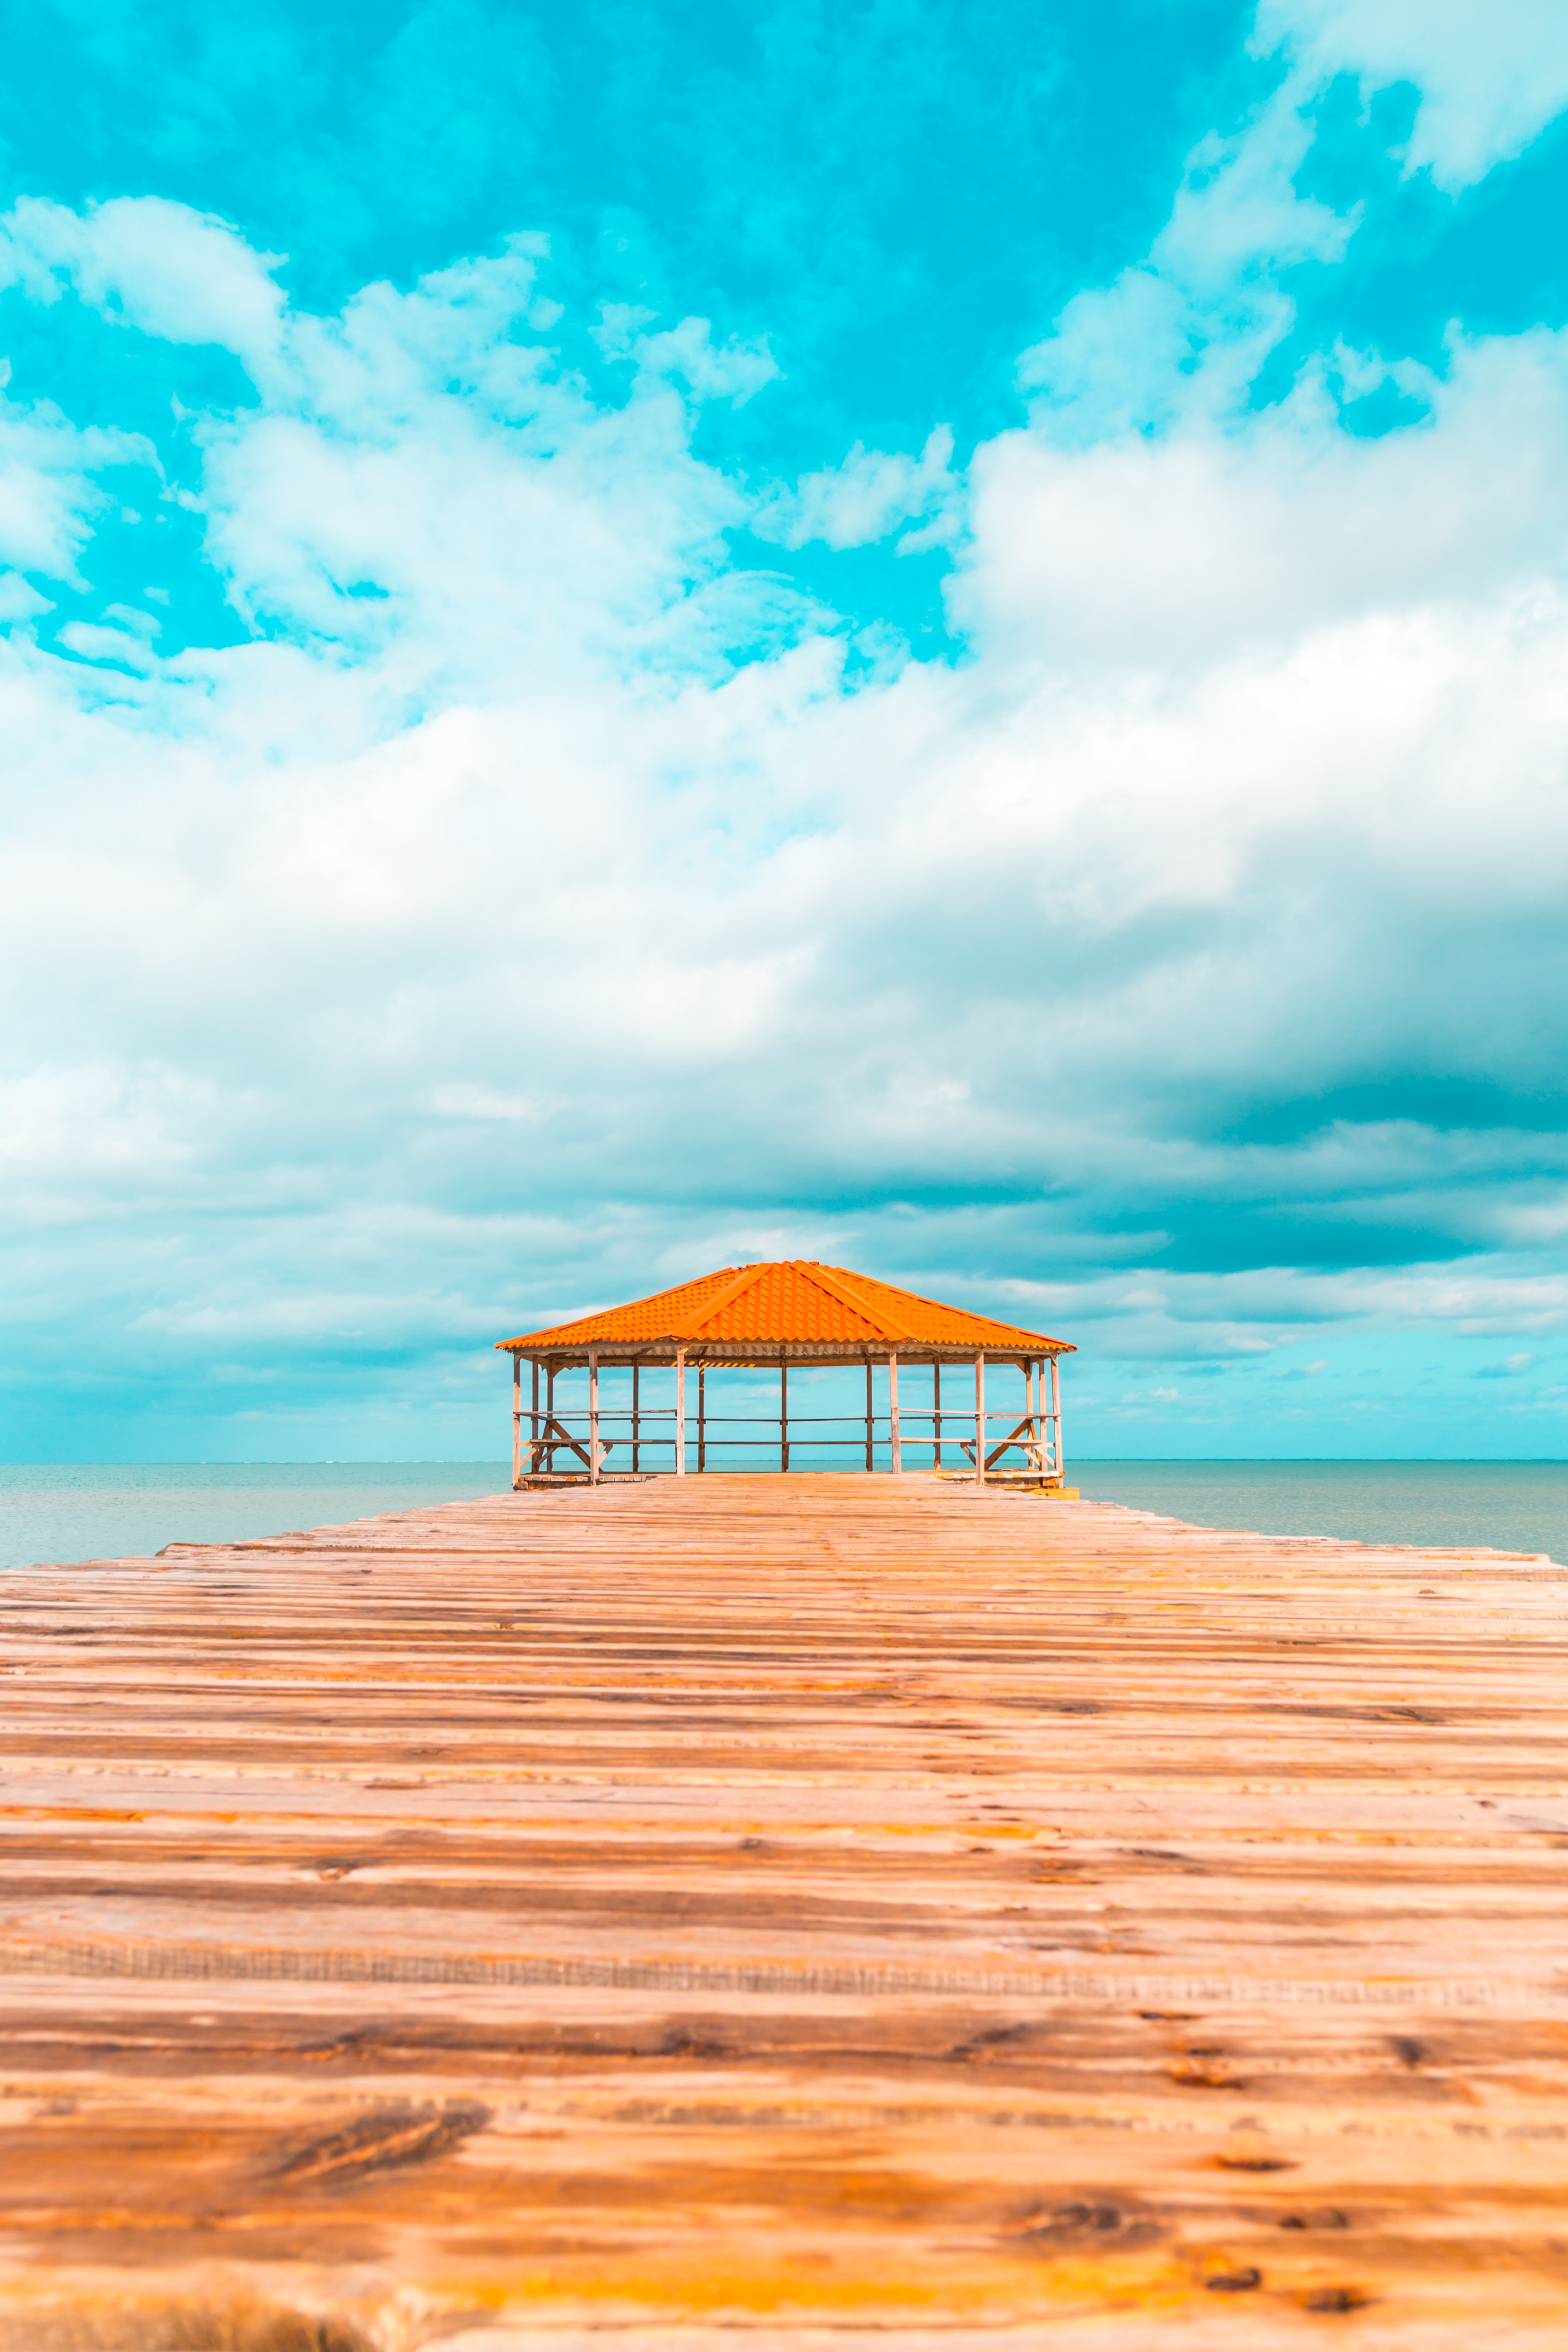 Free HD rest, pier, nature, clouds, ocean, relaxation, tropics, bower, alcove